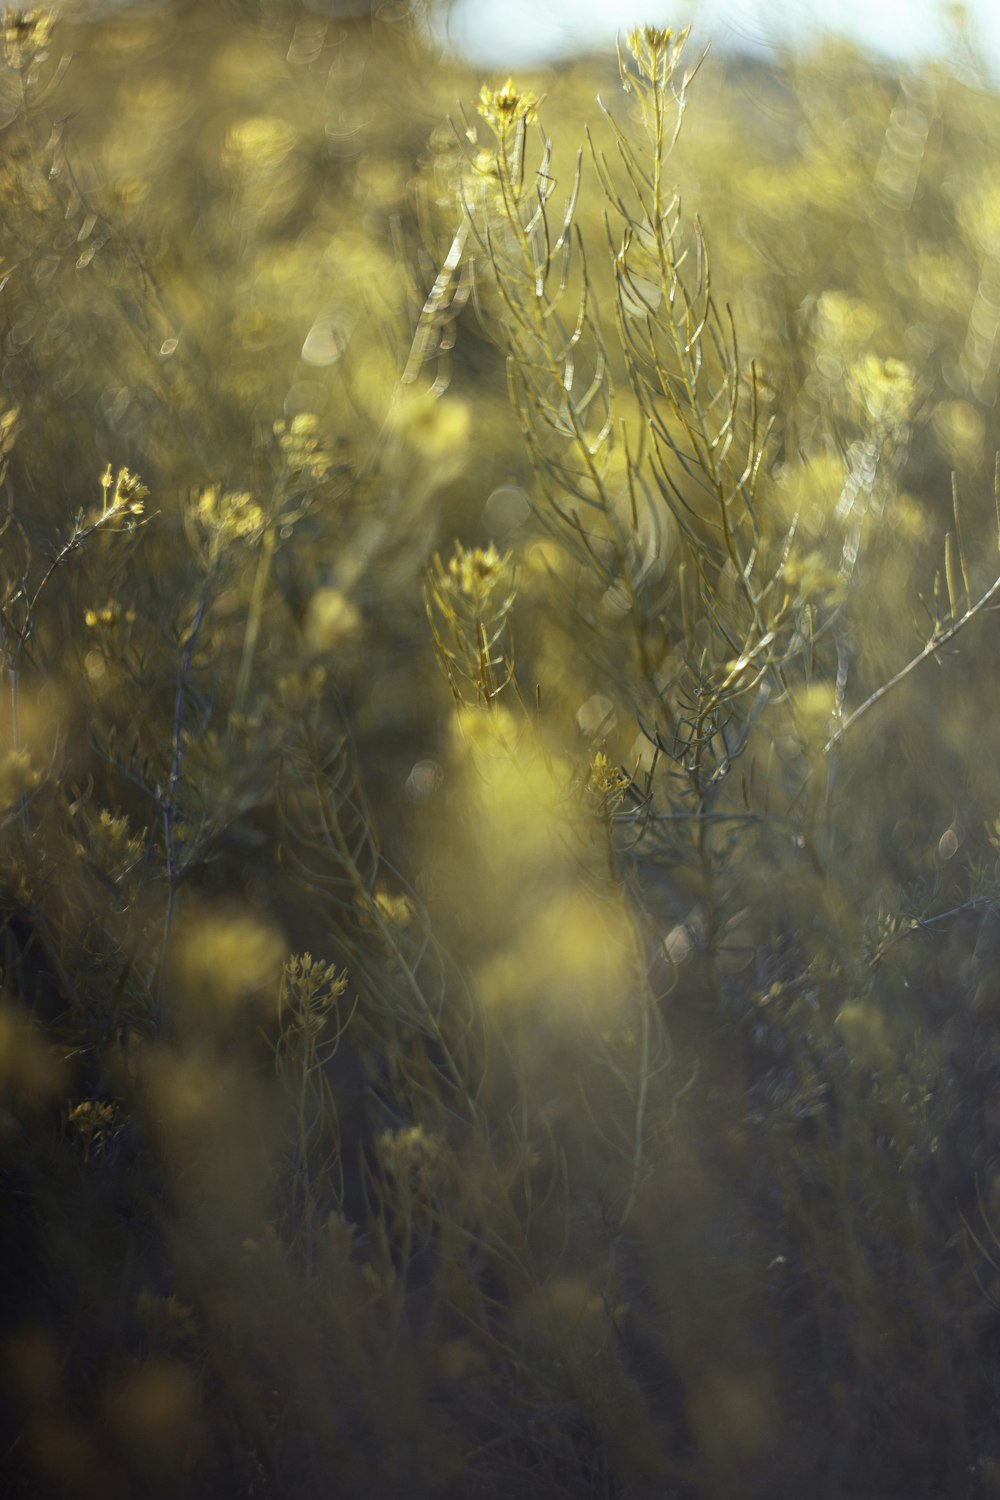 a blurry photo of a field of yellow flowers